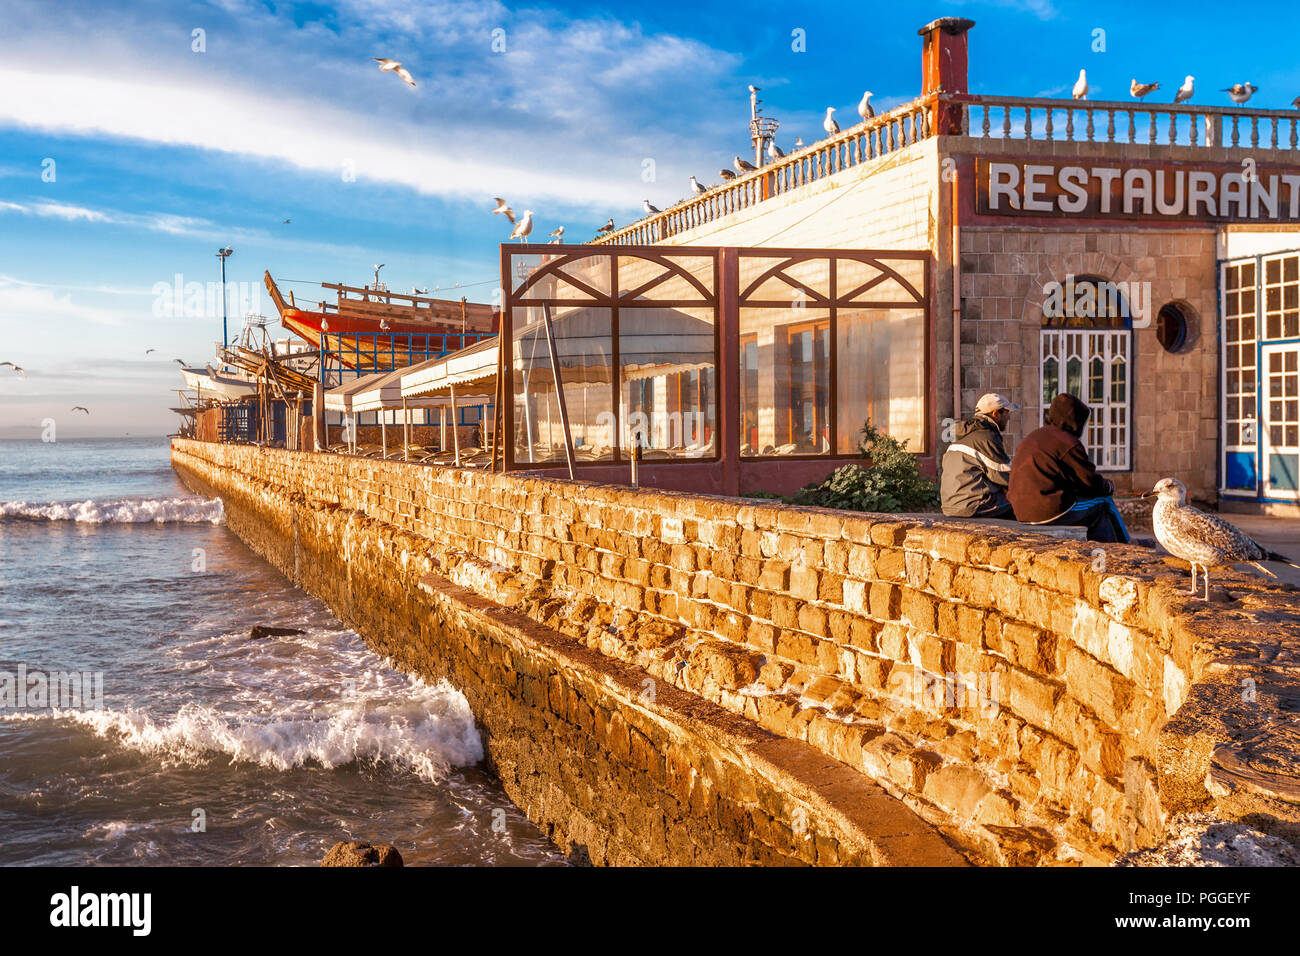 Morocco waterfront restaurant in Essaouira, a picturesque fishing village on the Atlantic coast. Waves hit a brick seawall. Beautiful light. Stock Photo